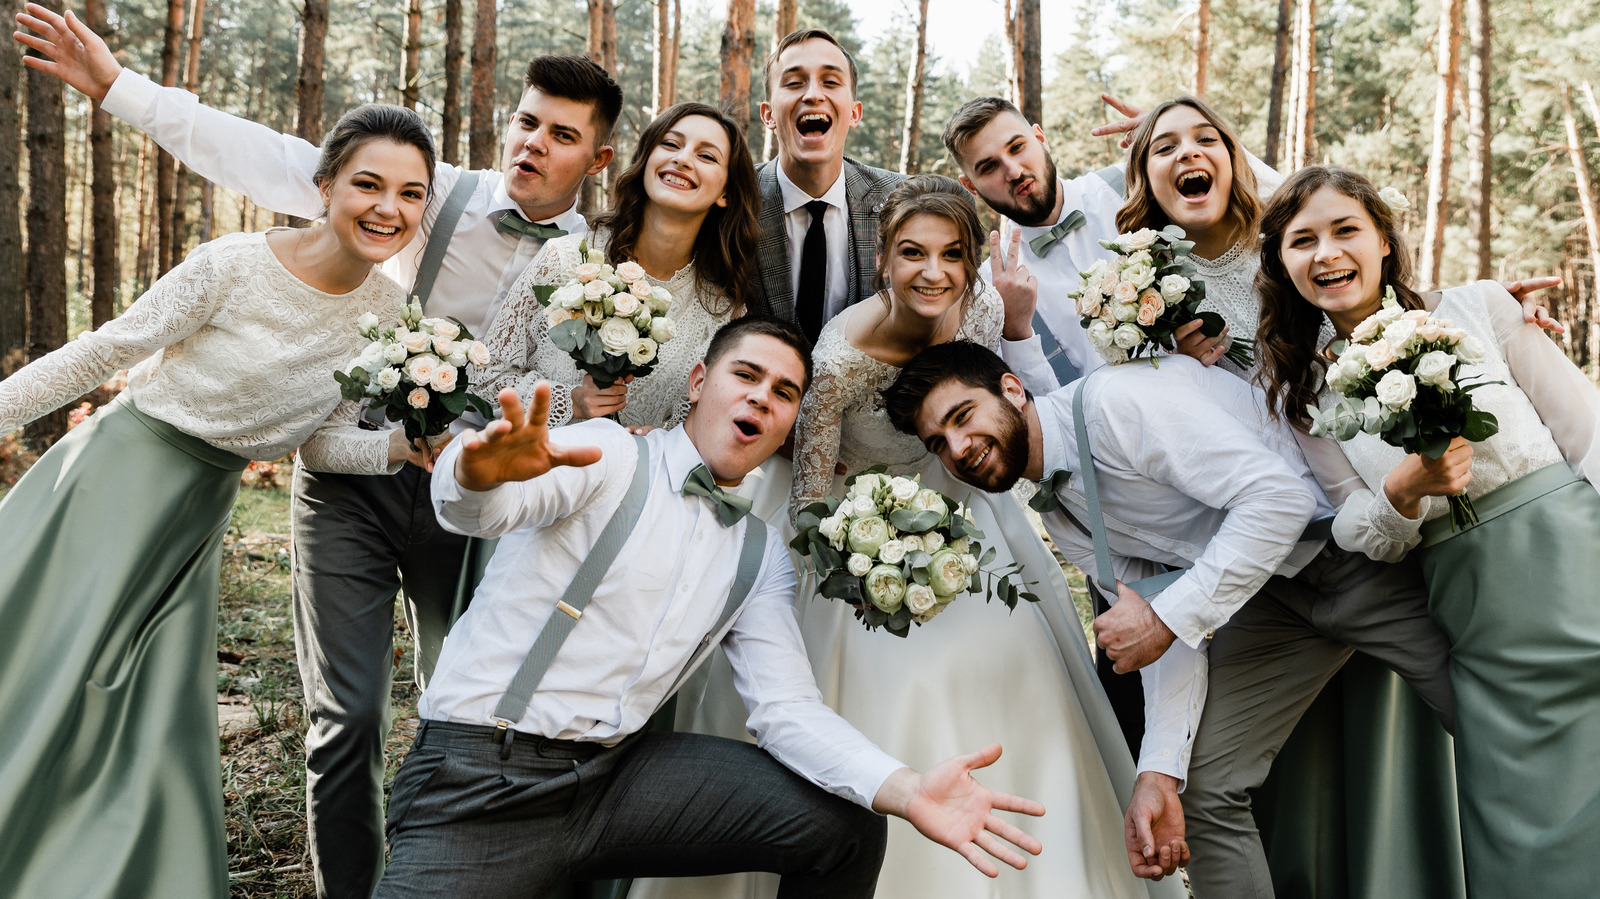 How to do a mixed-gender wedding party right